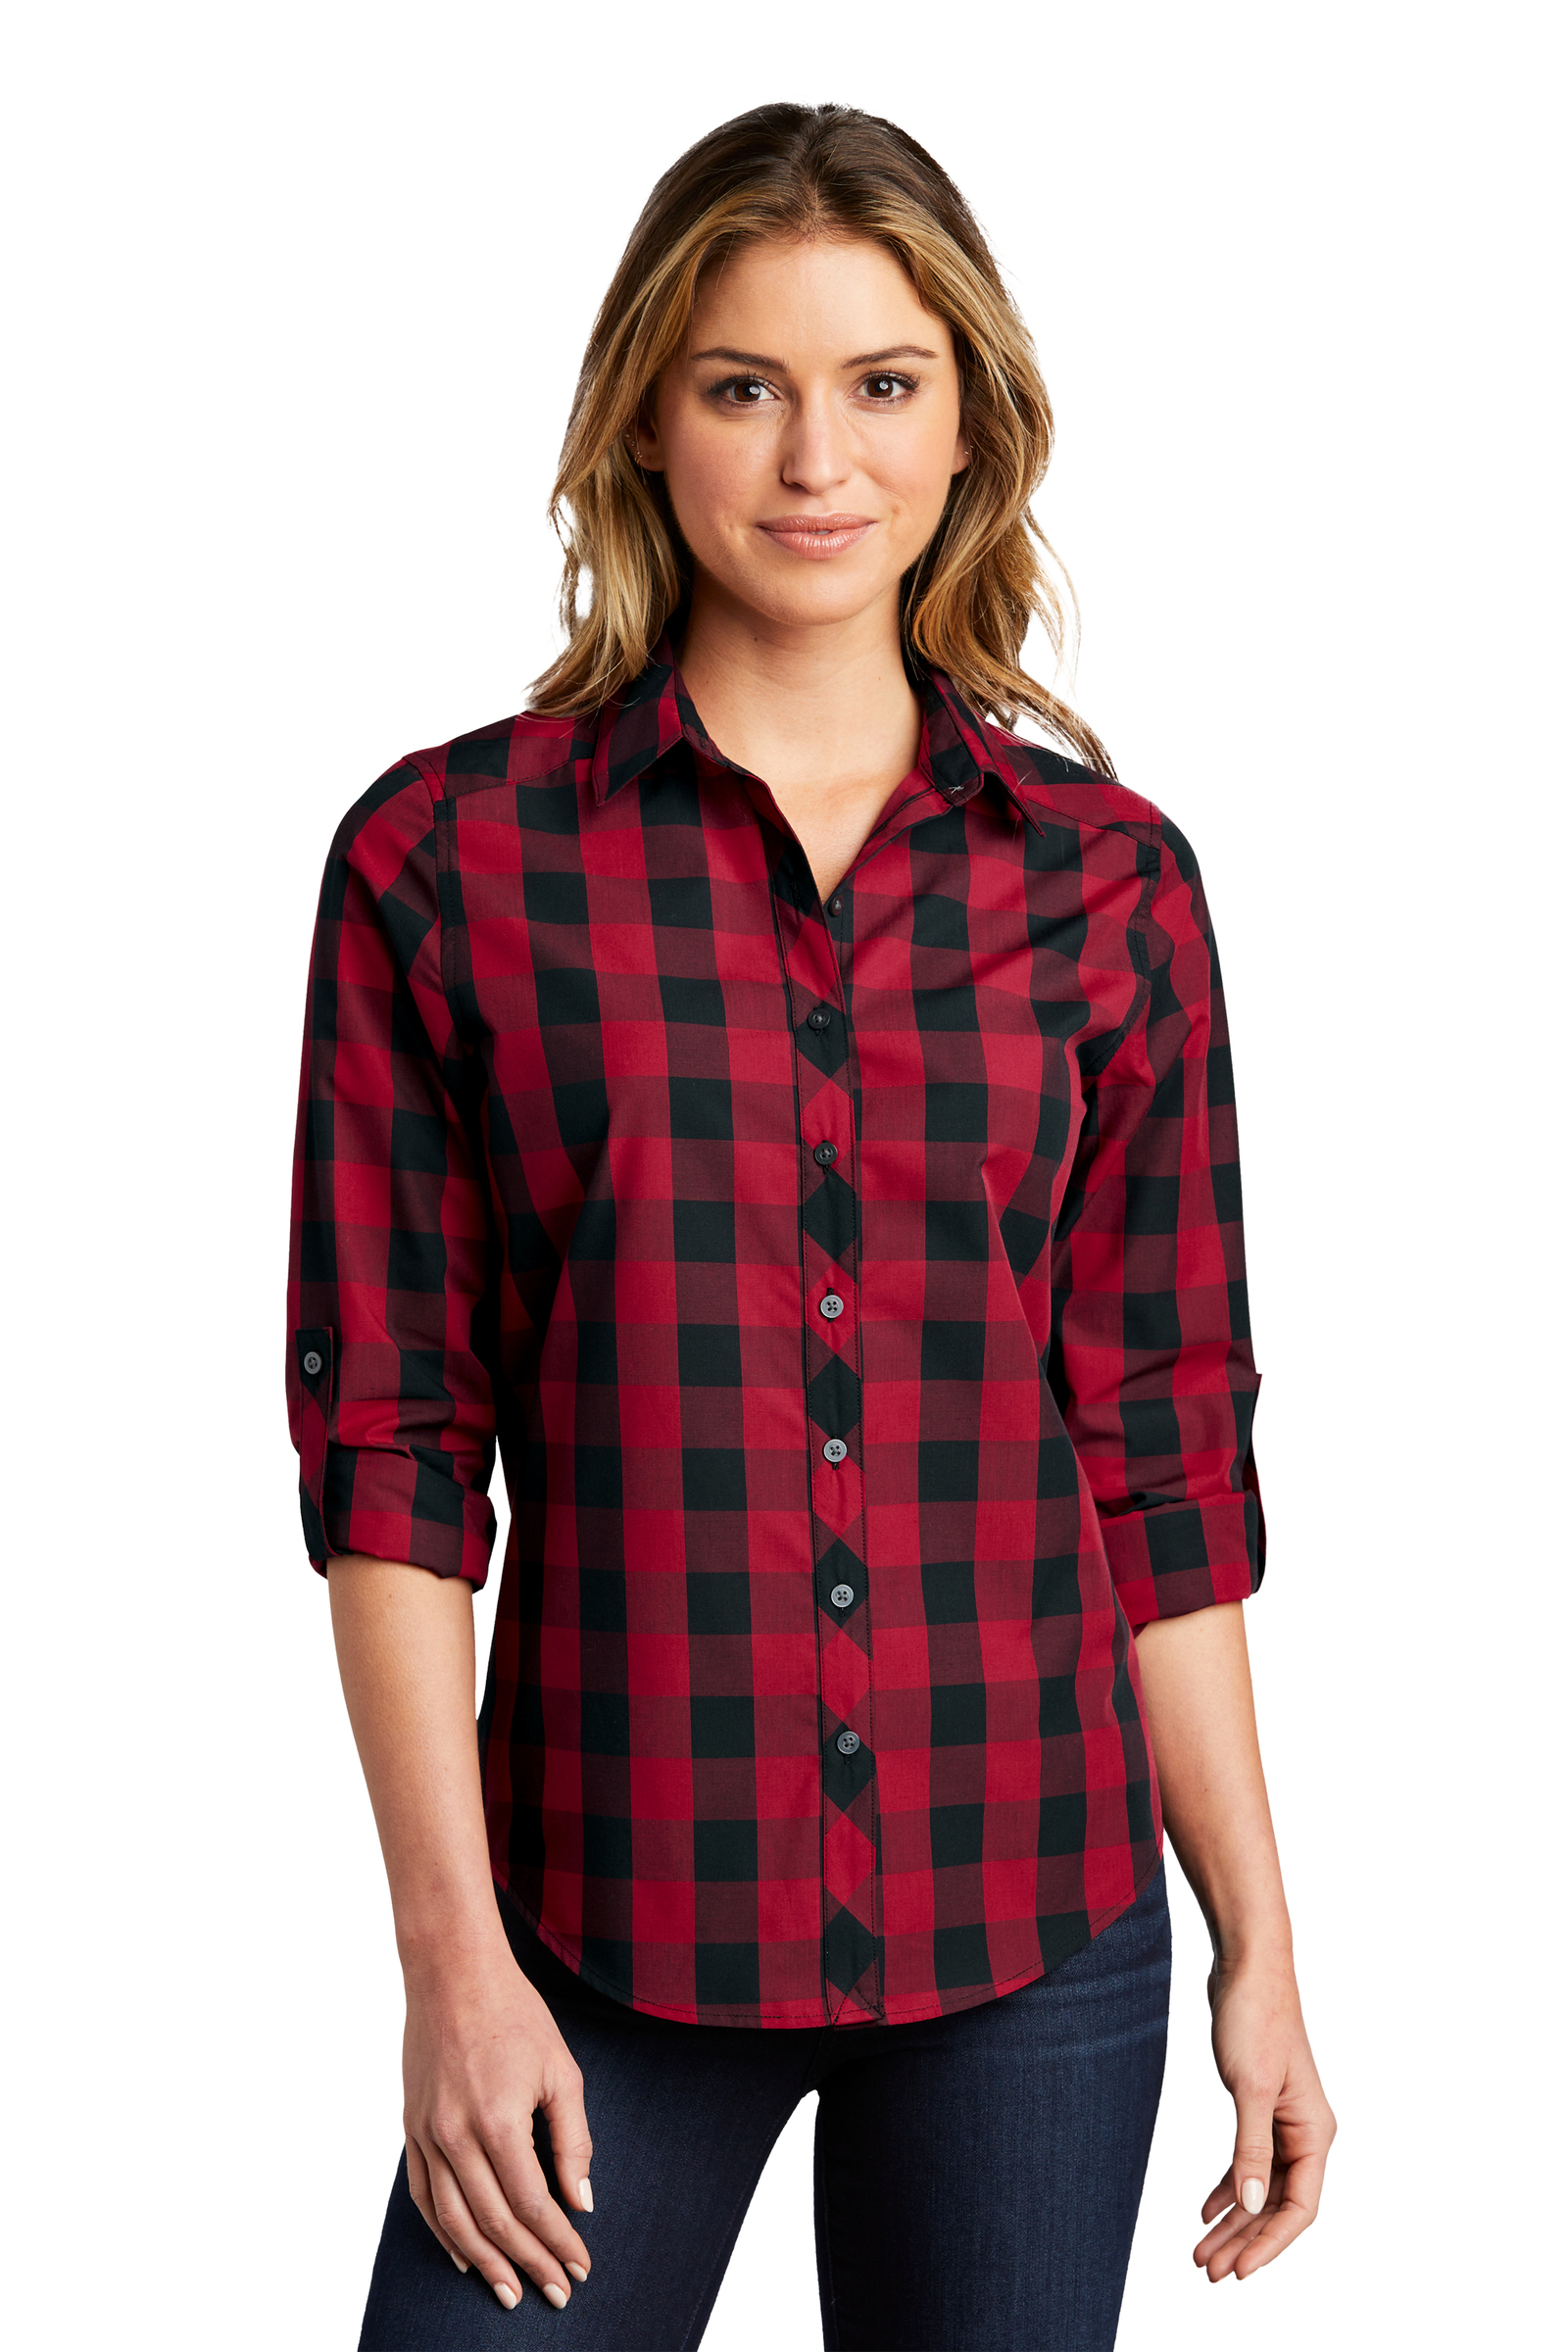 Port Authority Embroidered Women's Everyday Plaid Shirt